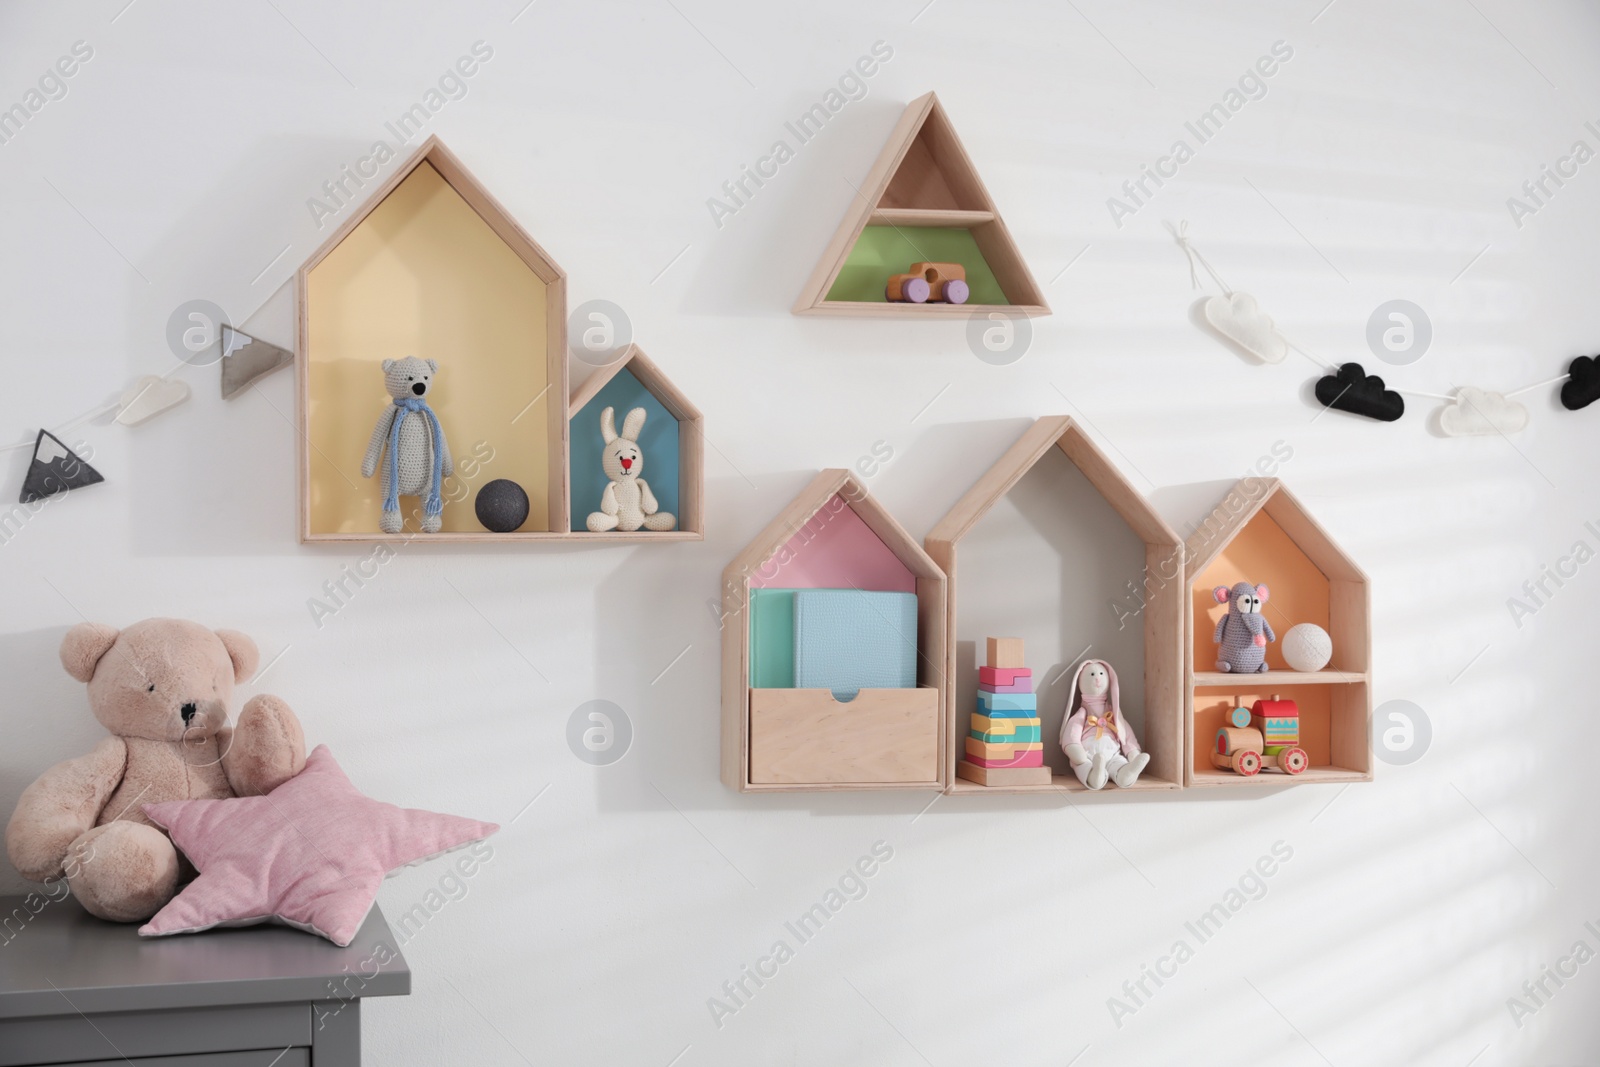 Photo of Cute house shaped shelves and garlands on white wall indoors. Children's room interior design